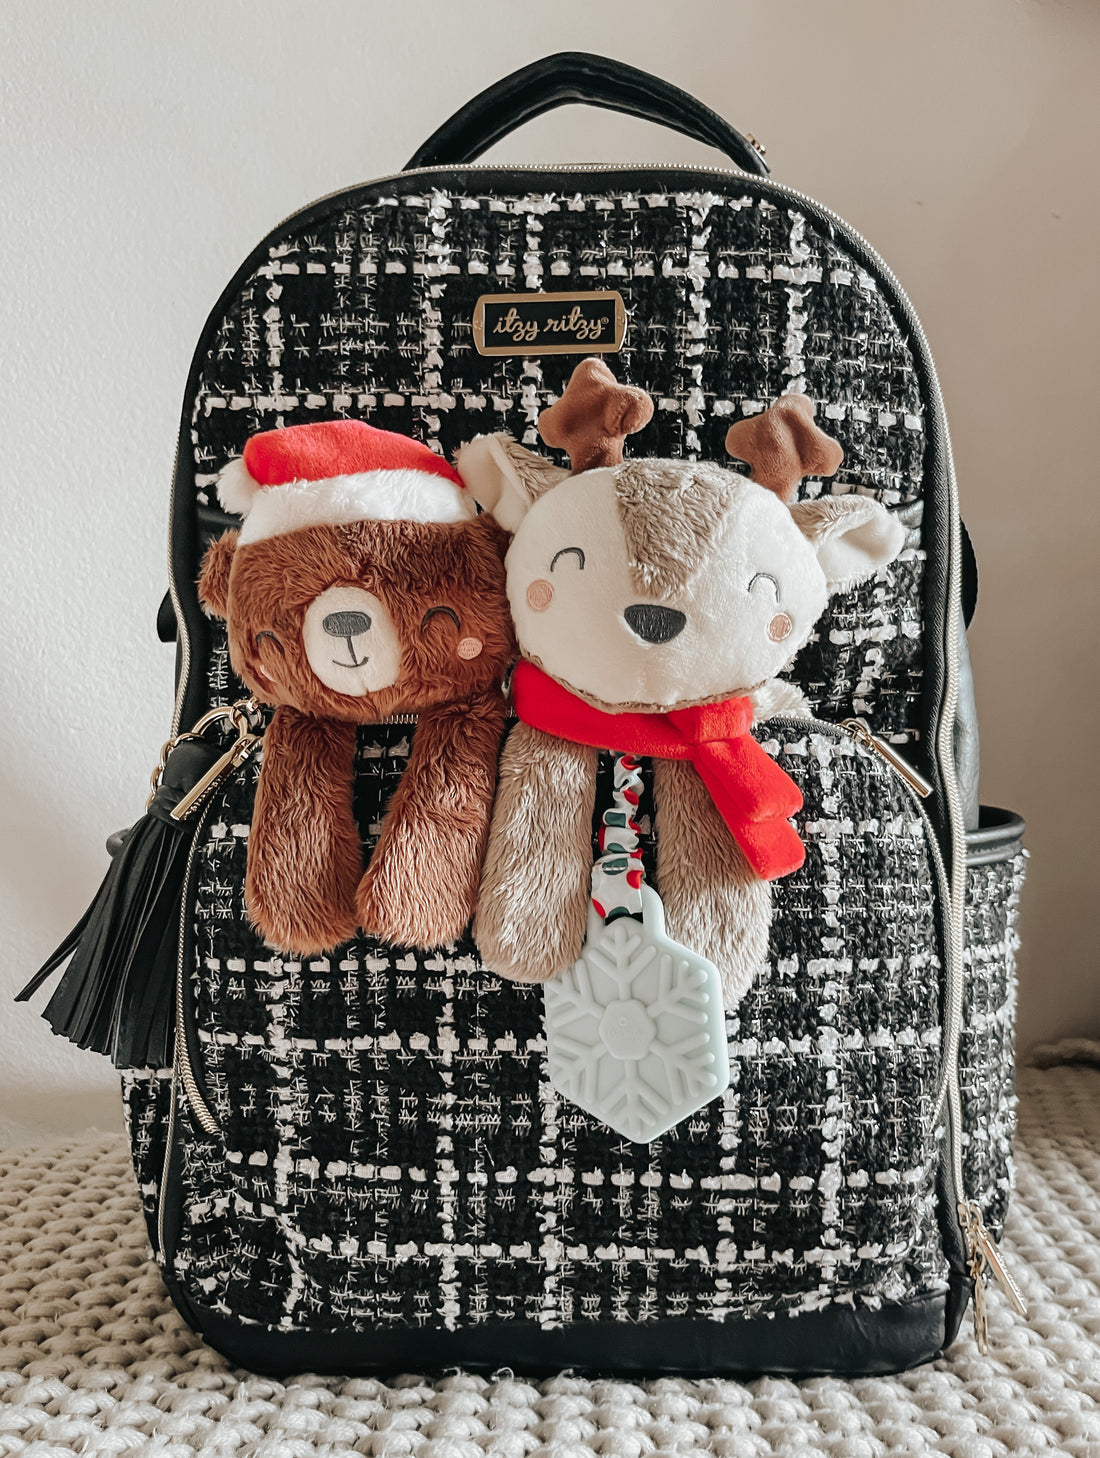 Best Holiday Gifts for New Parents & Baby - Itzy Ritzy 2022 Gift Guide